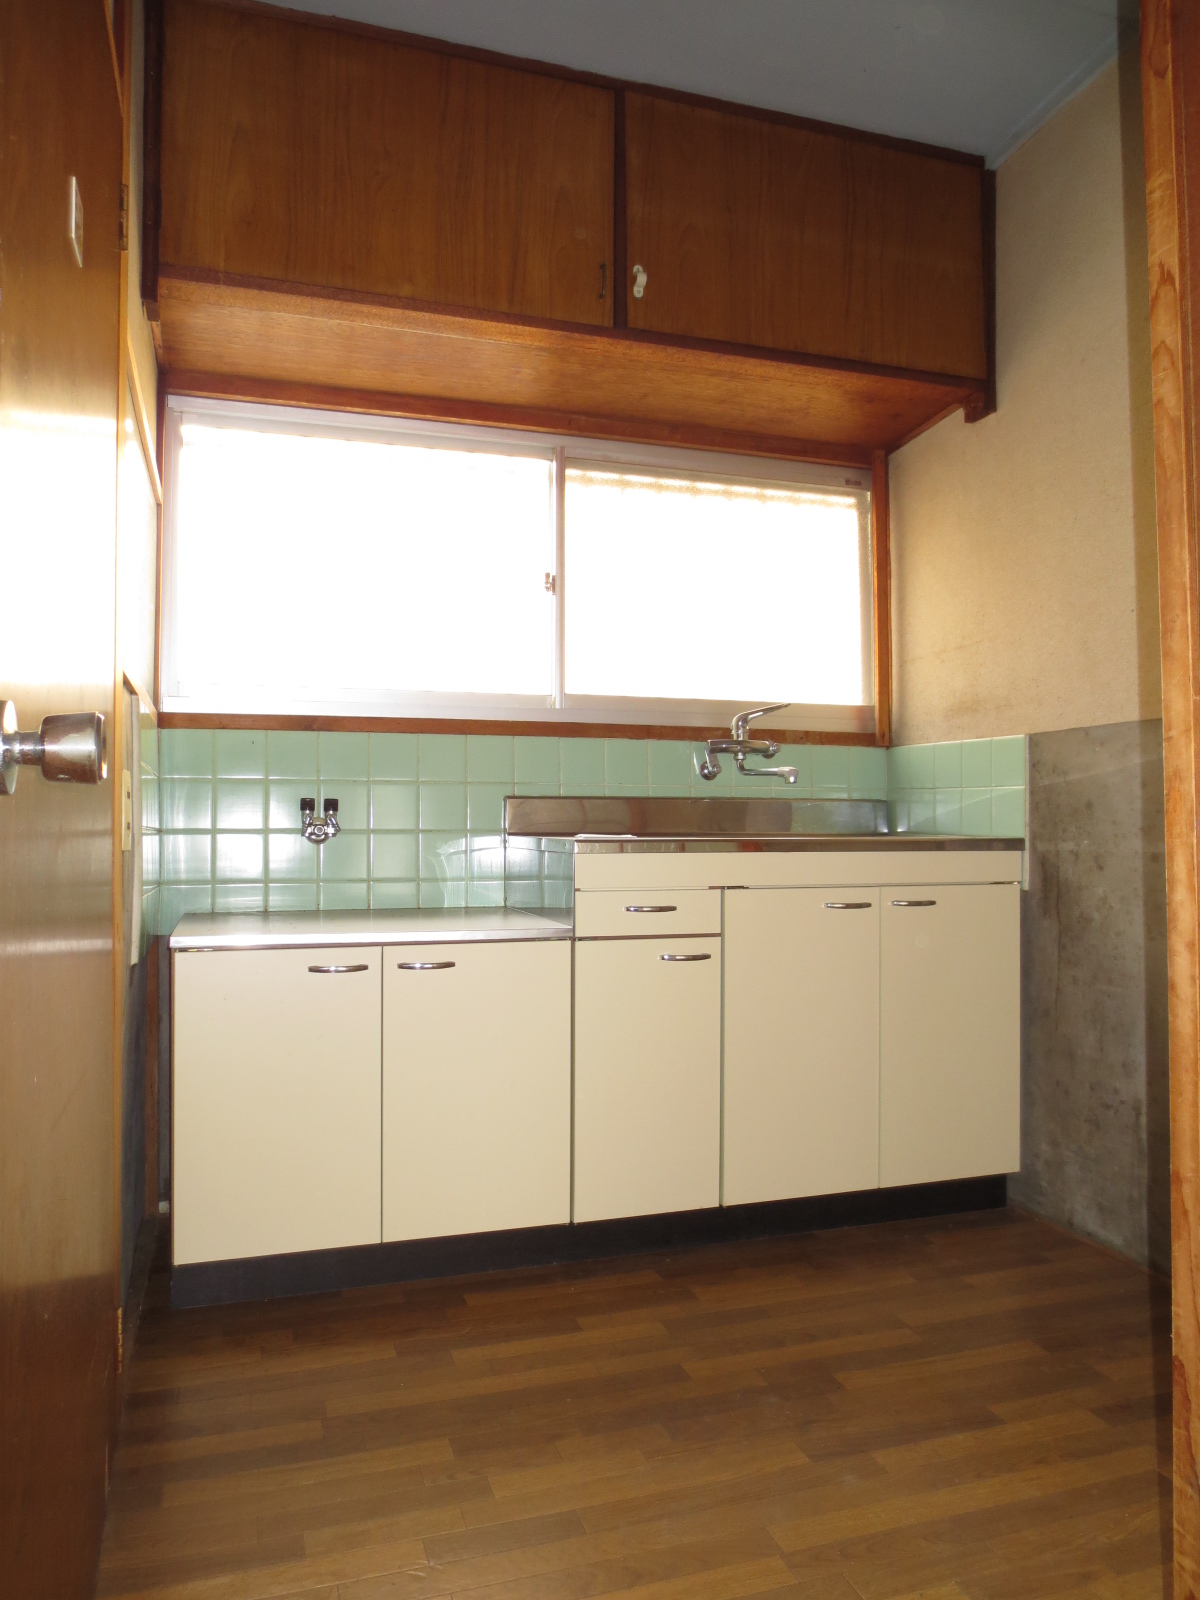 Kitchen. It is a simple structure.